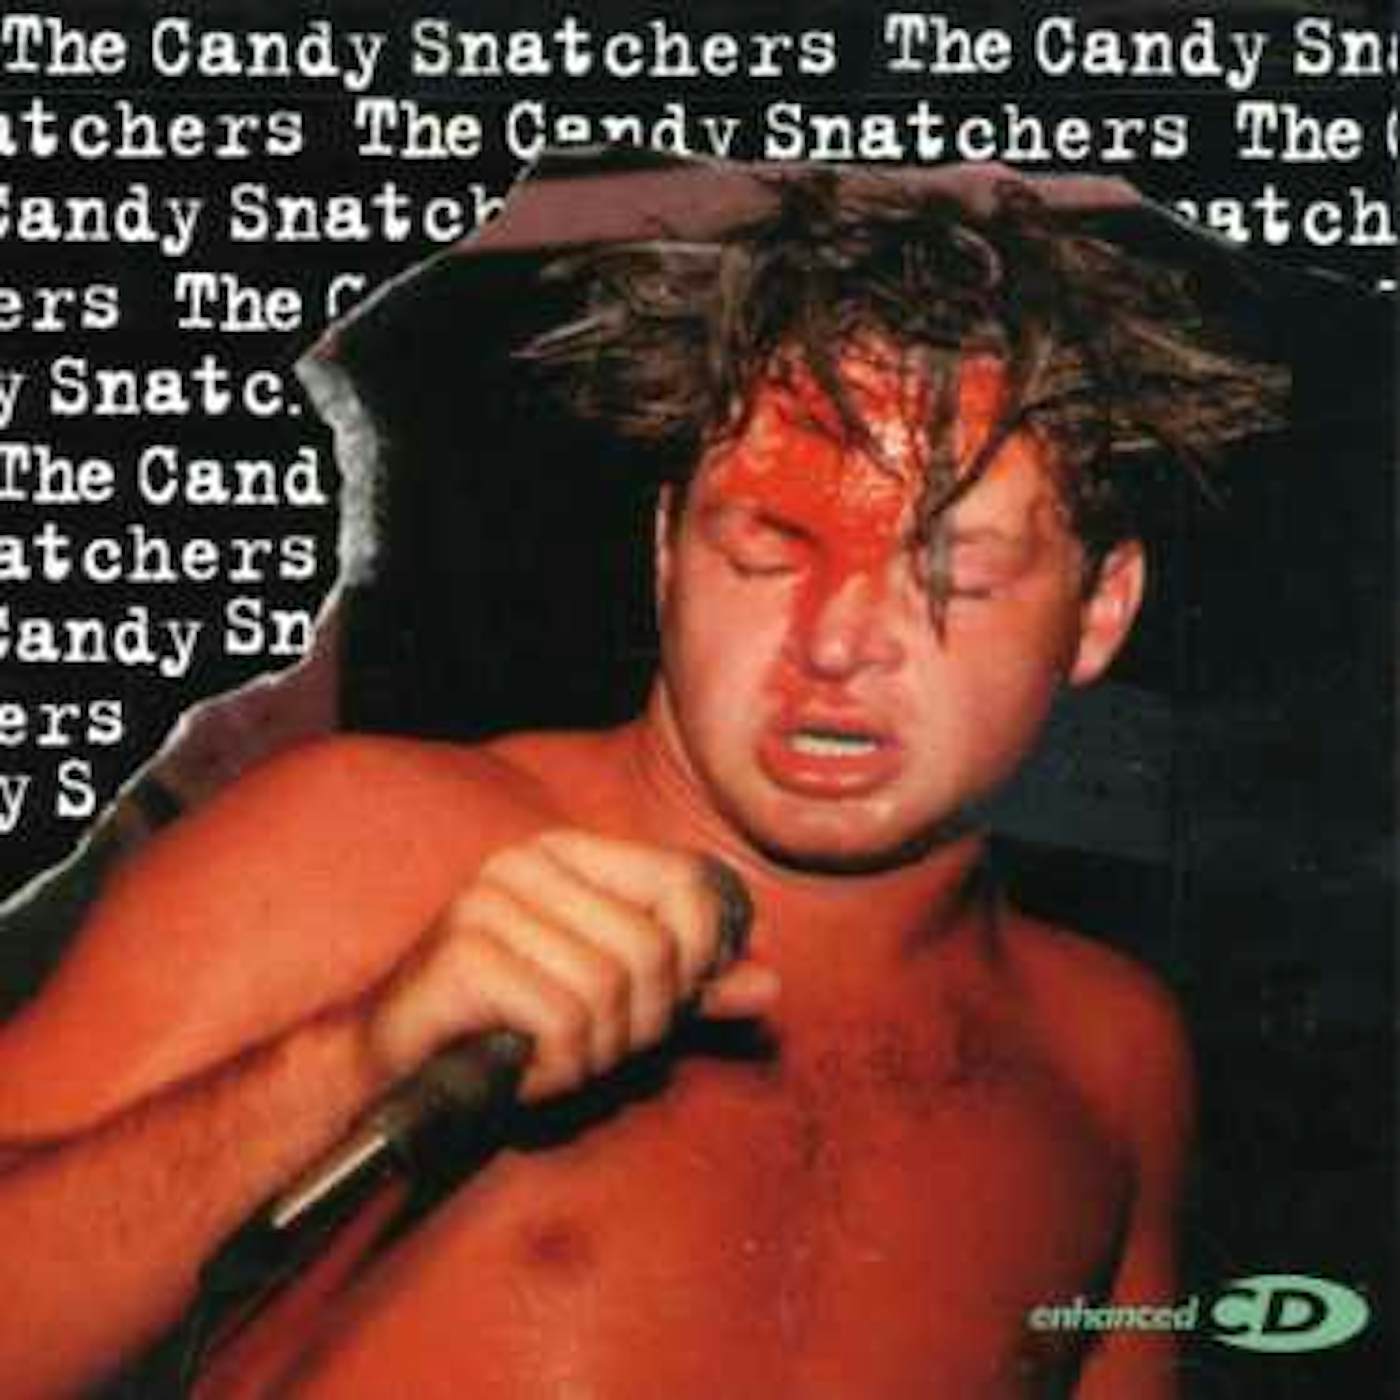 The Candy Snatchers CD